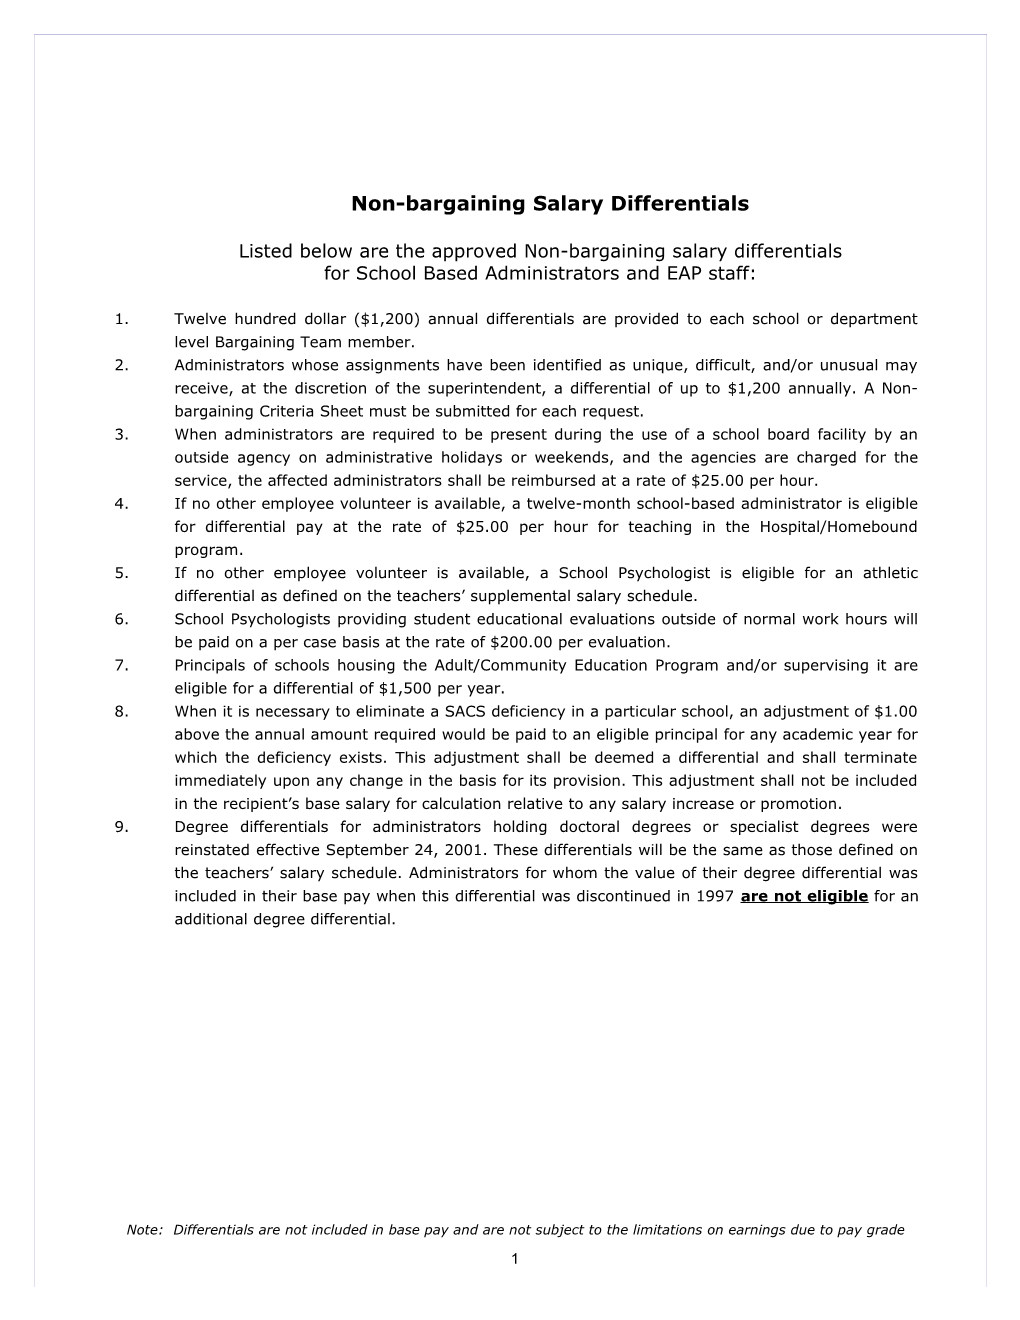 Non-Bargaining School-Based Differential Supplement